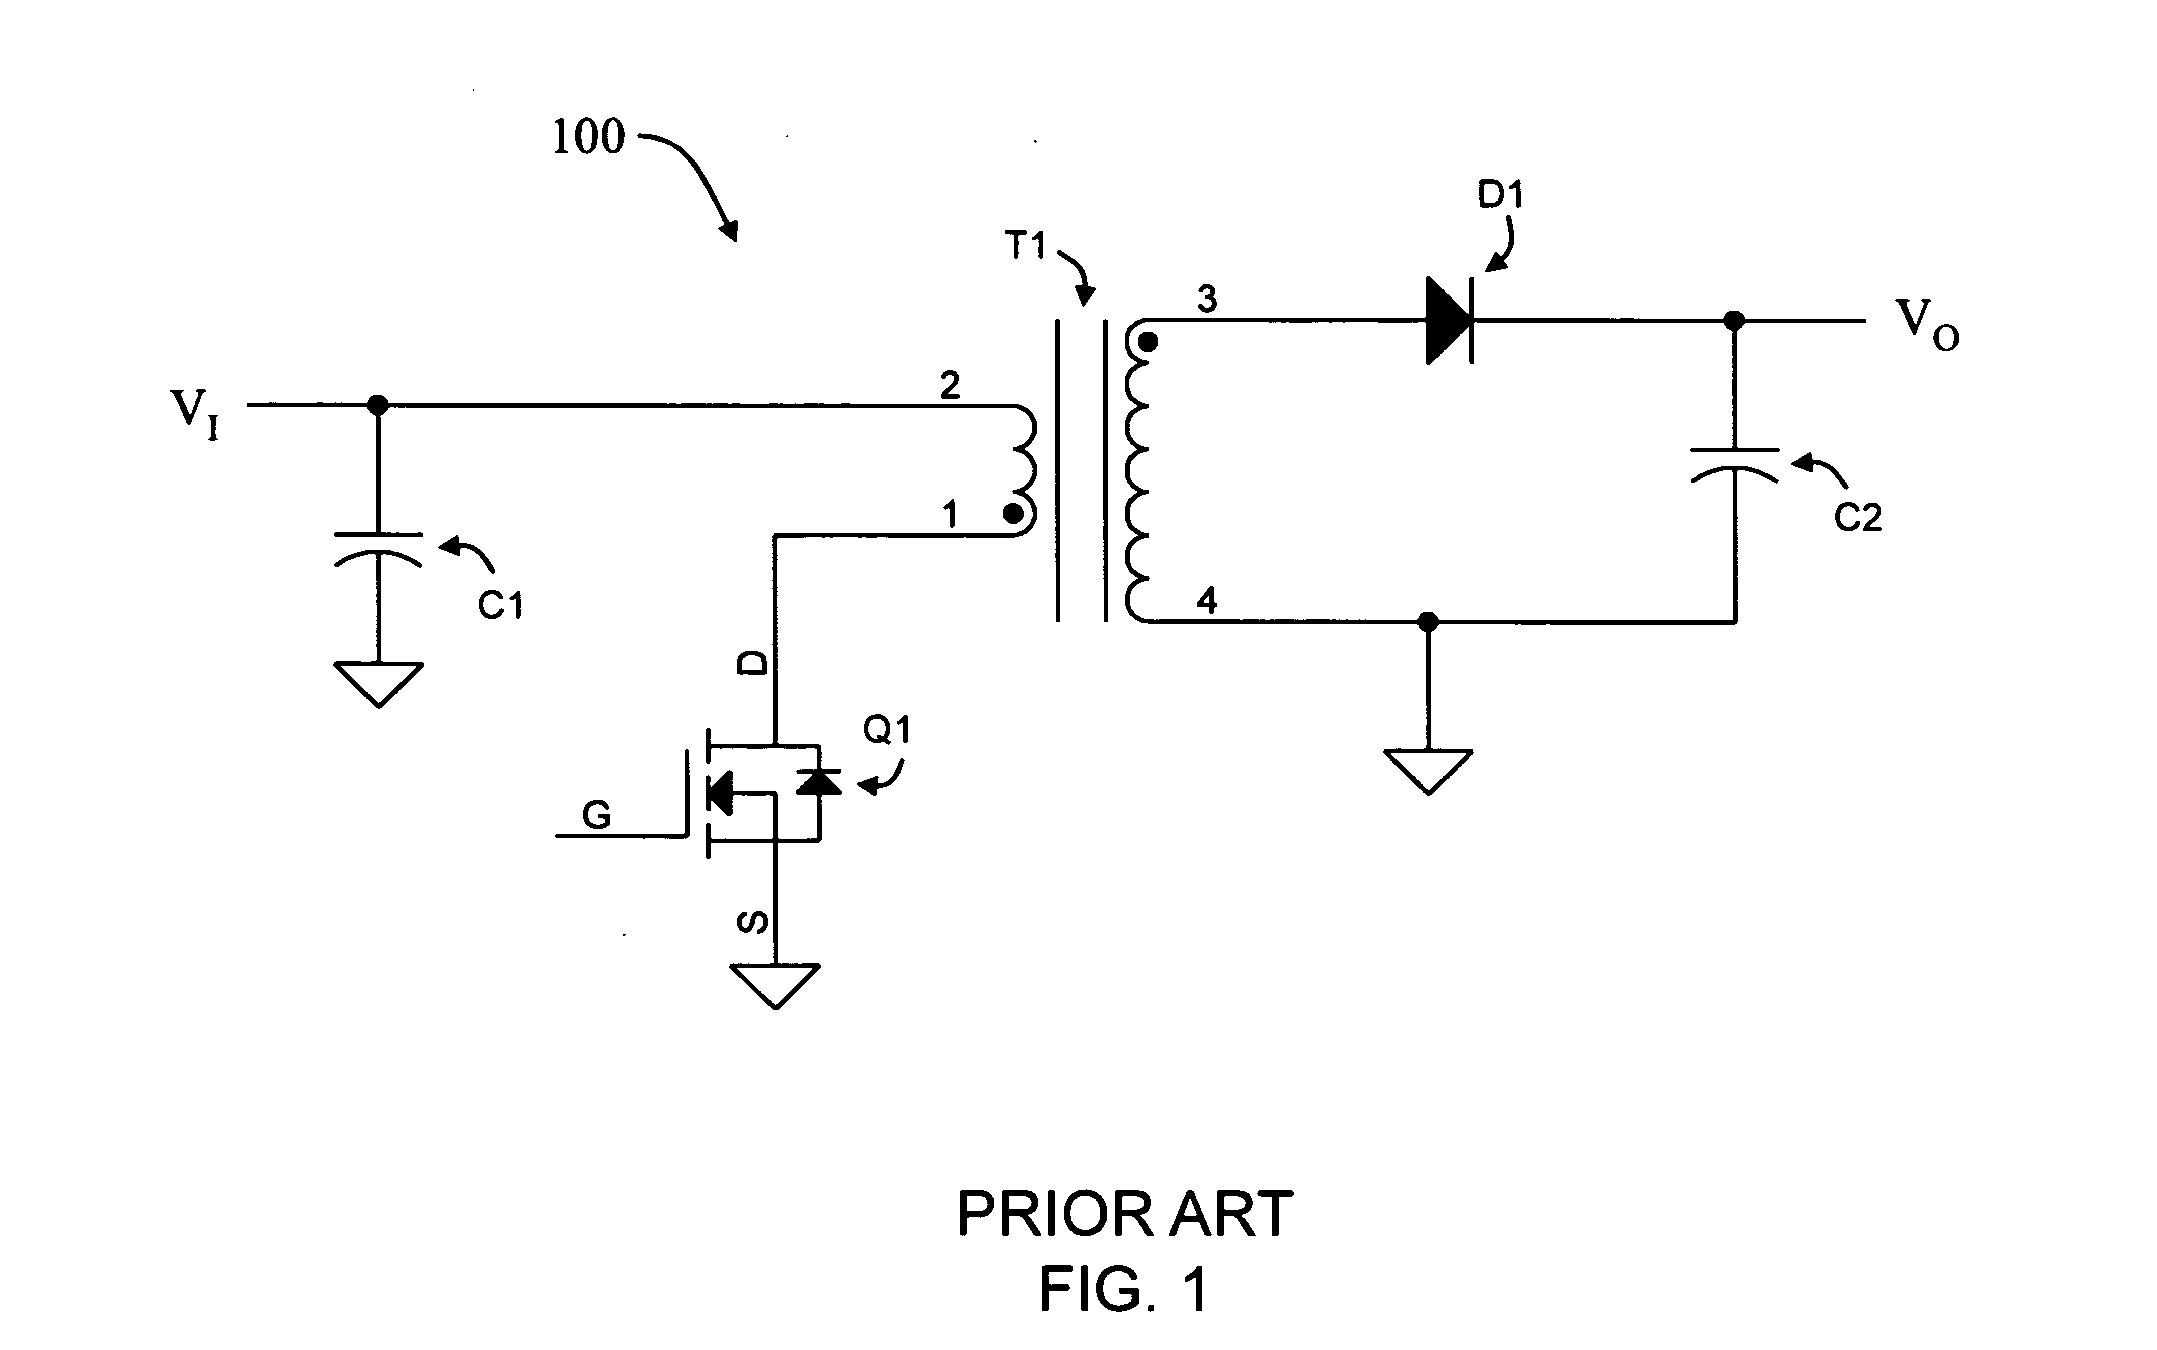 Power circuitry for high-frequency applications